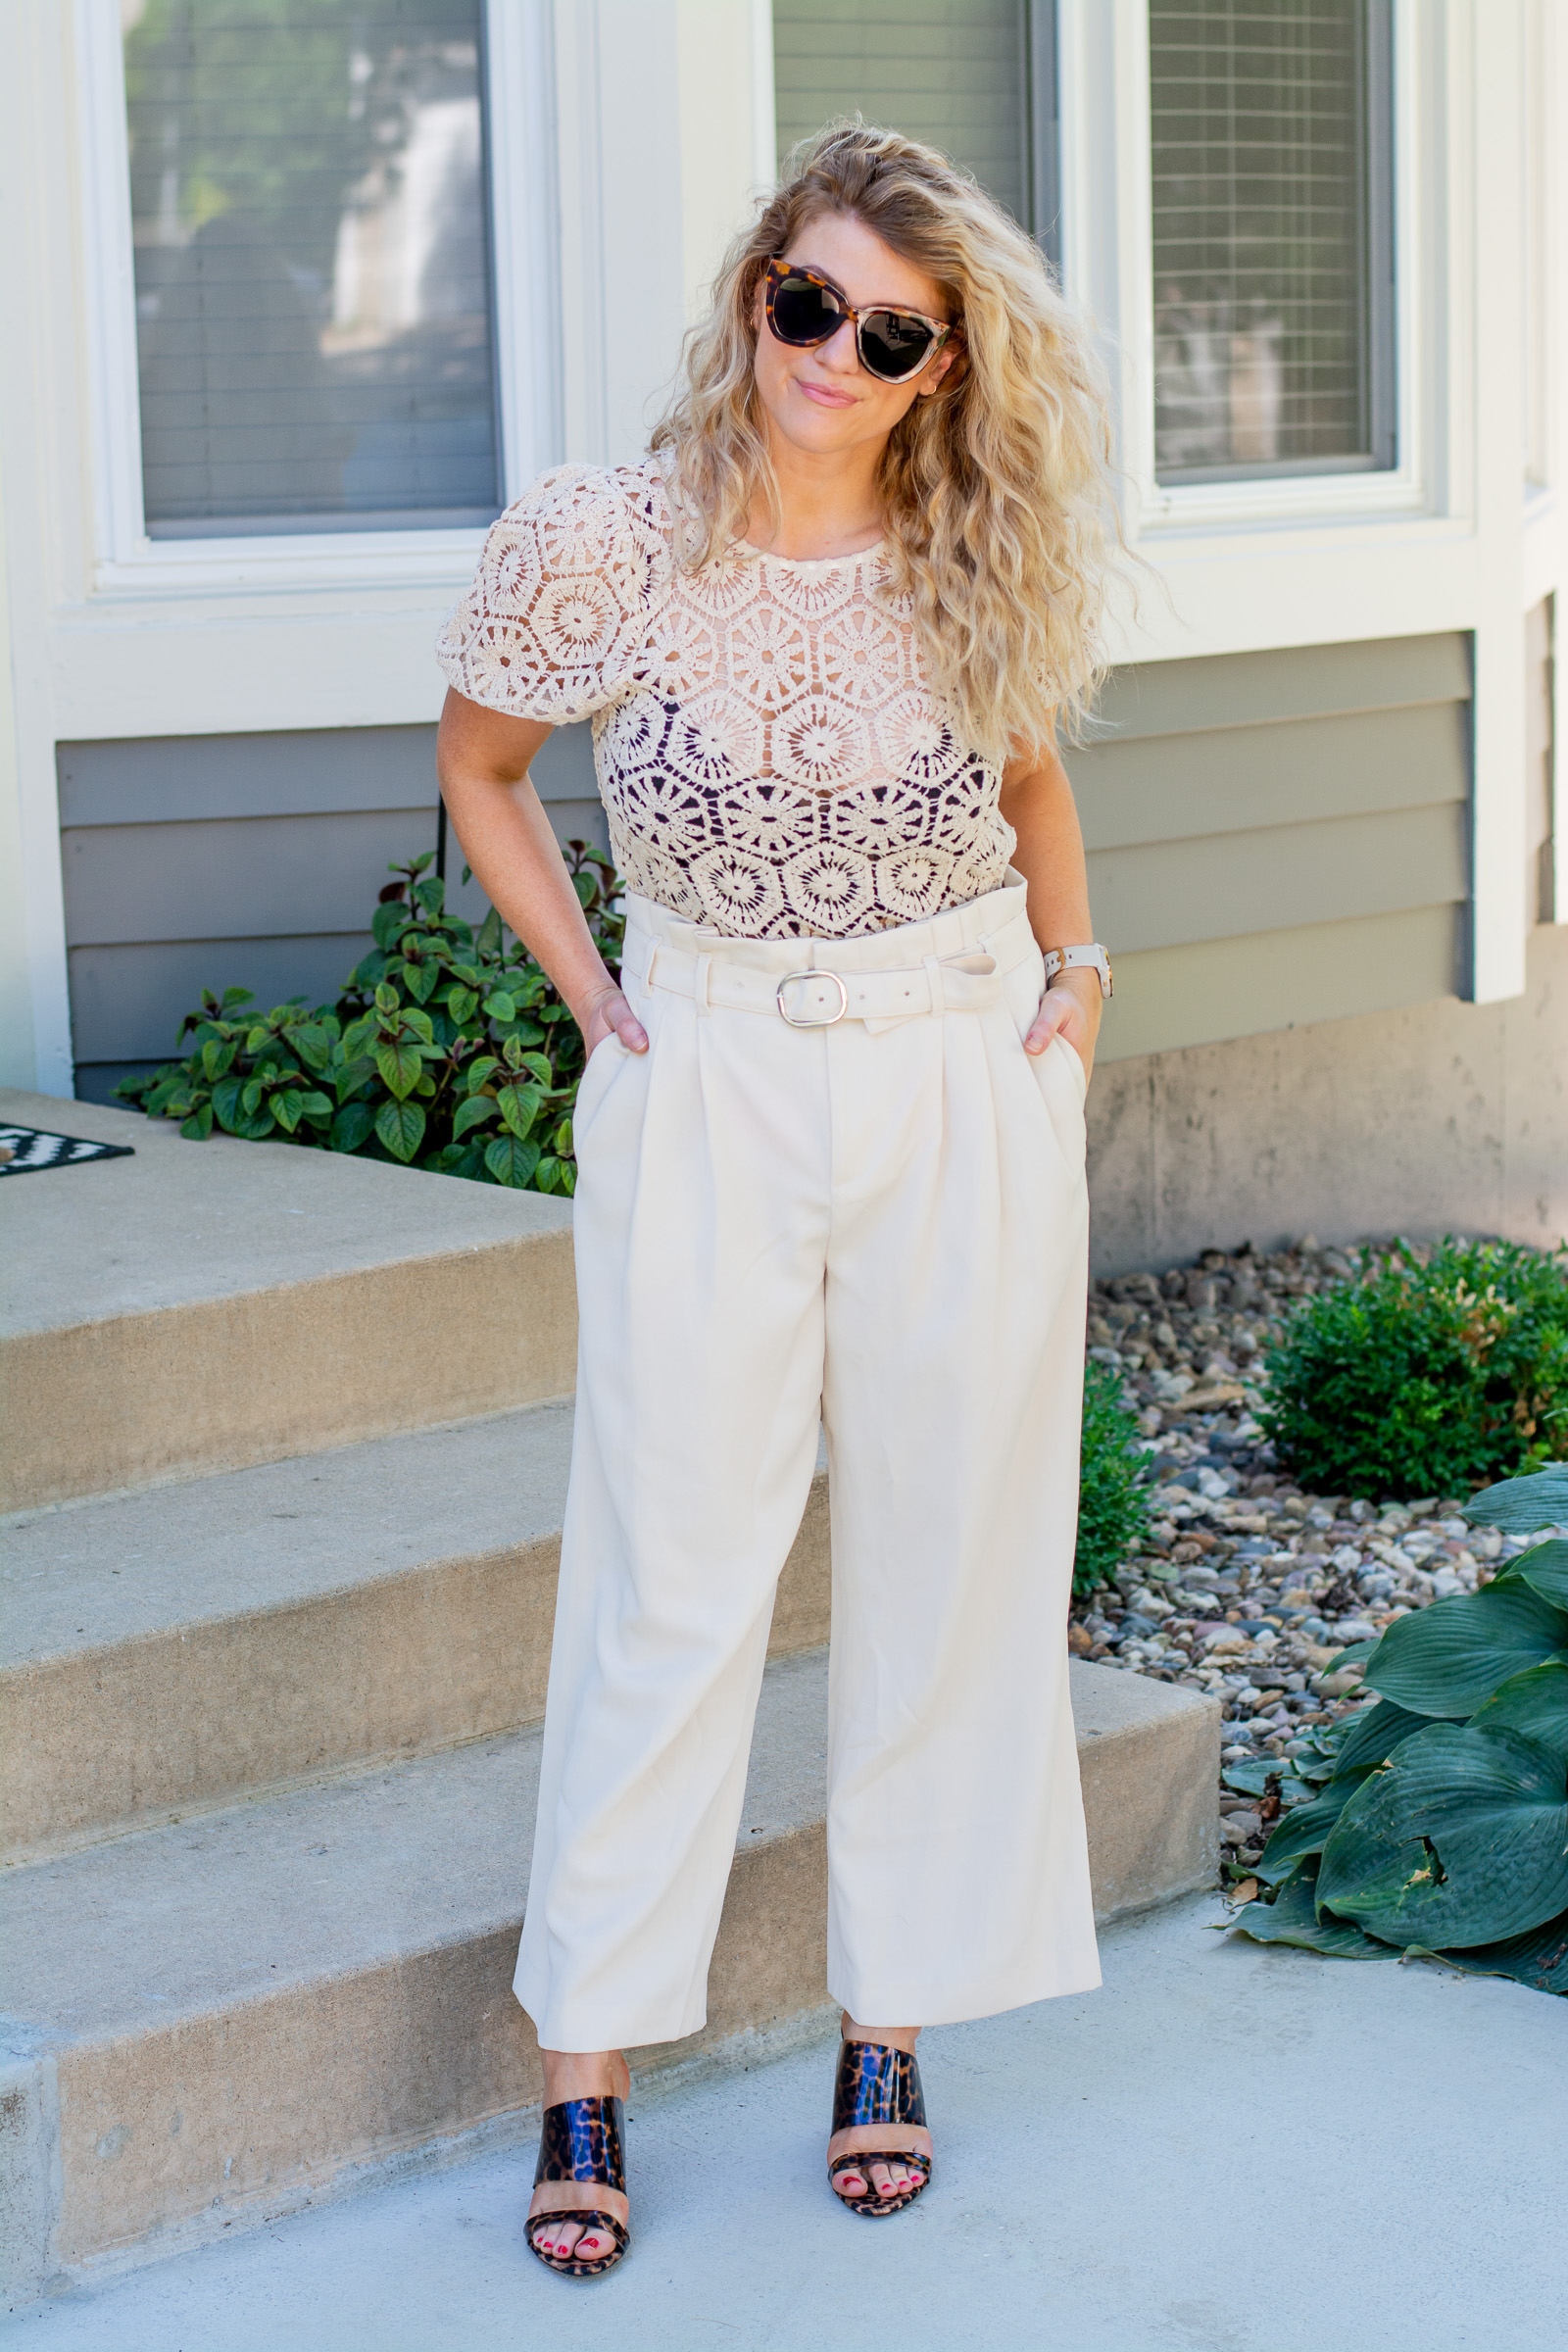 All Beige, Baby: Crochet Top and Zara Trousers. | Le Stylo Rouge